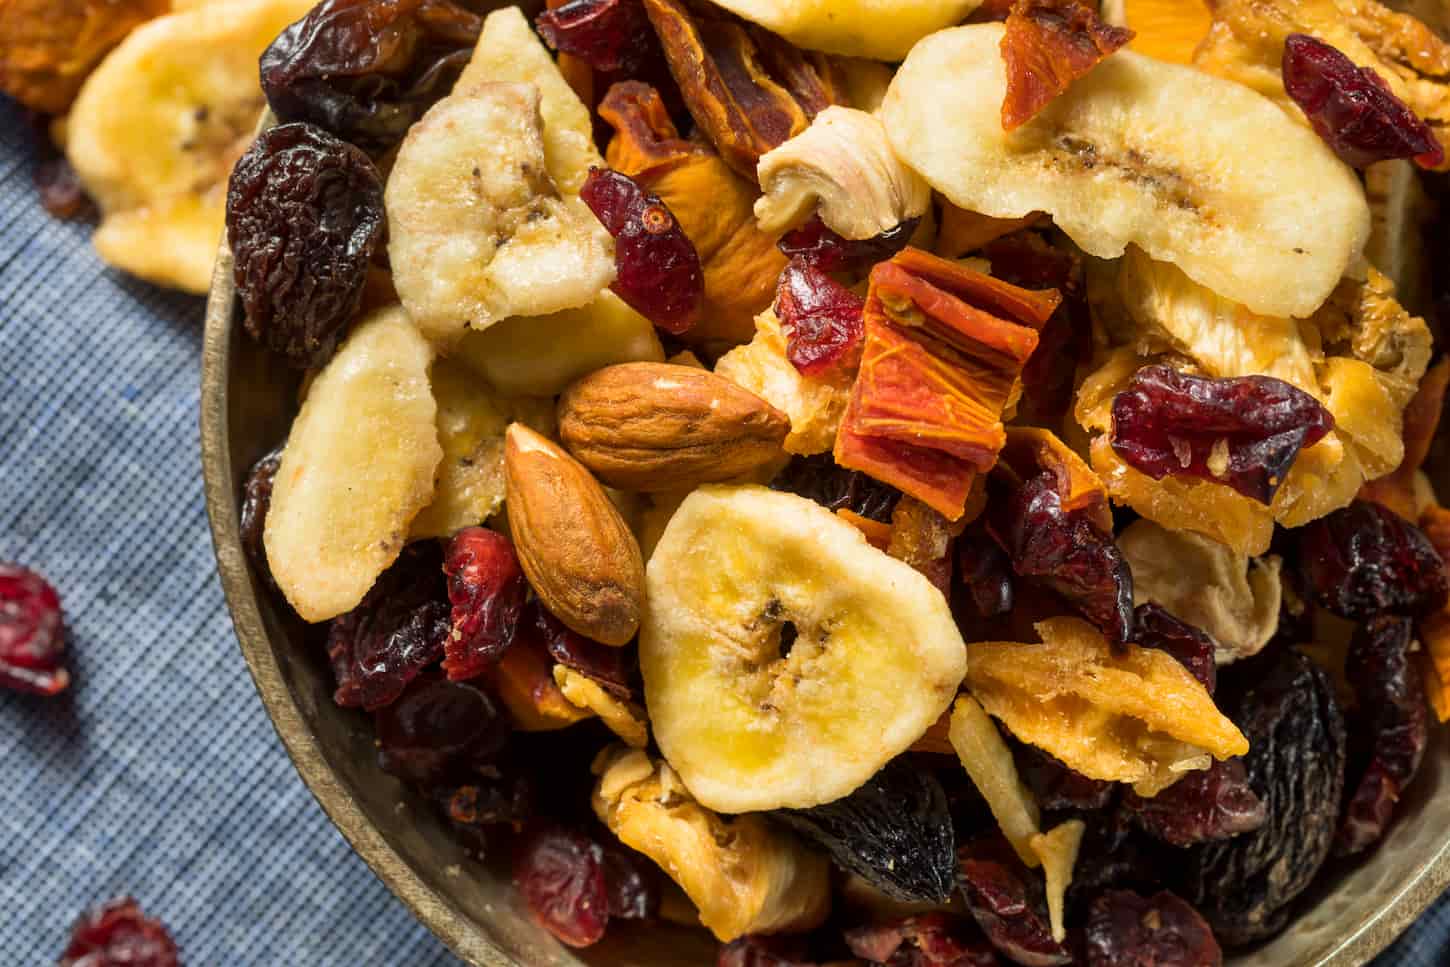 An image of Organic Dried Fruit Trail Mix with Cherries and Bananas in a big bowl.